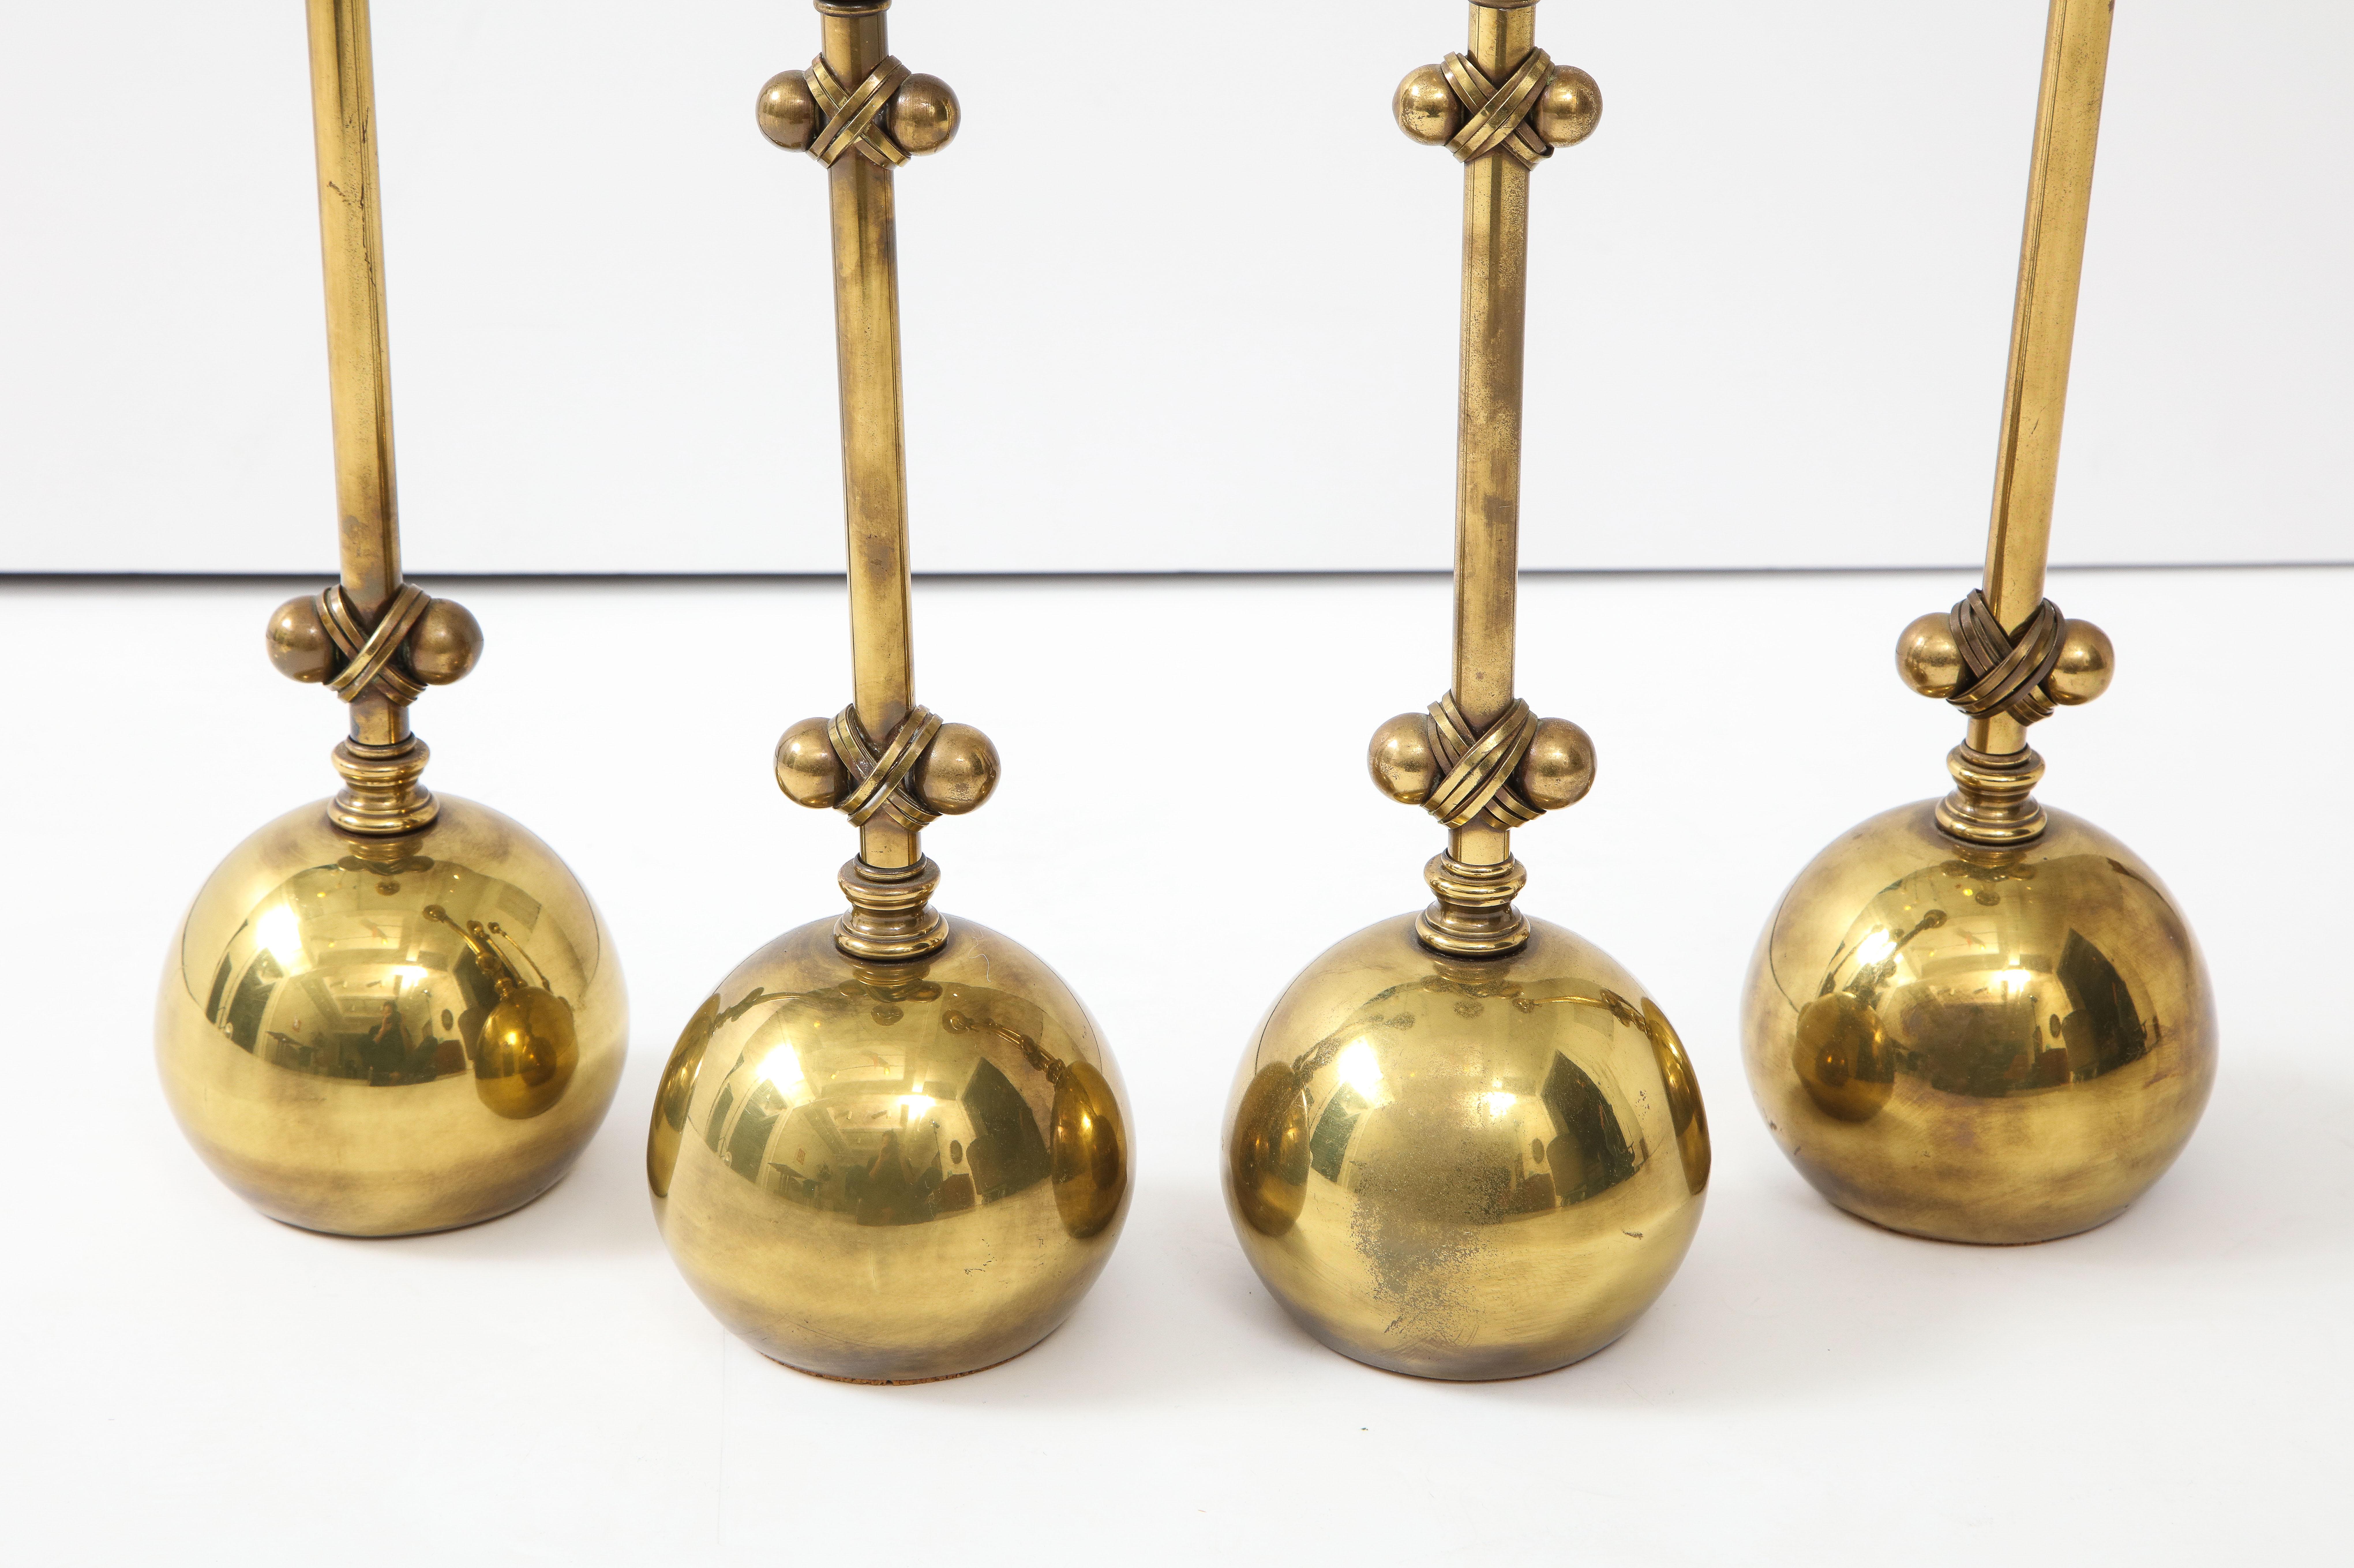 1980s modern brass candleholders in vintage original condition with some wear and patina to the brass attributed to Chapman.

Measures: Smaller candleholders height 13.25, width 4.